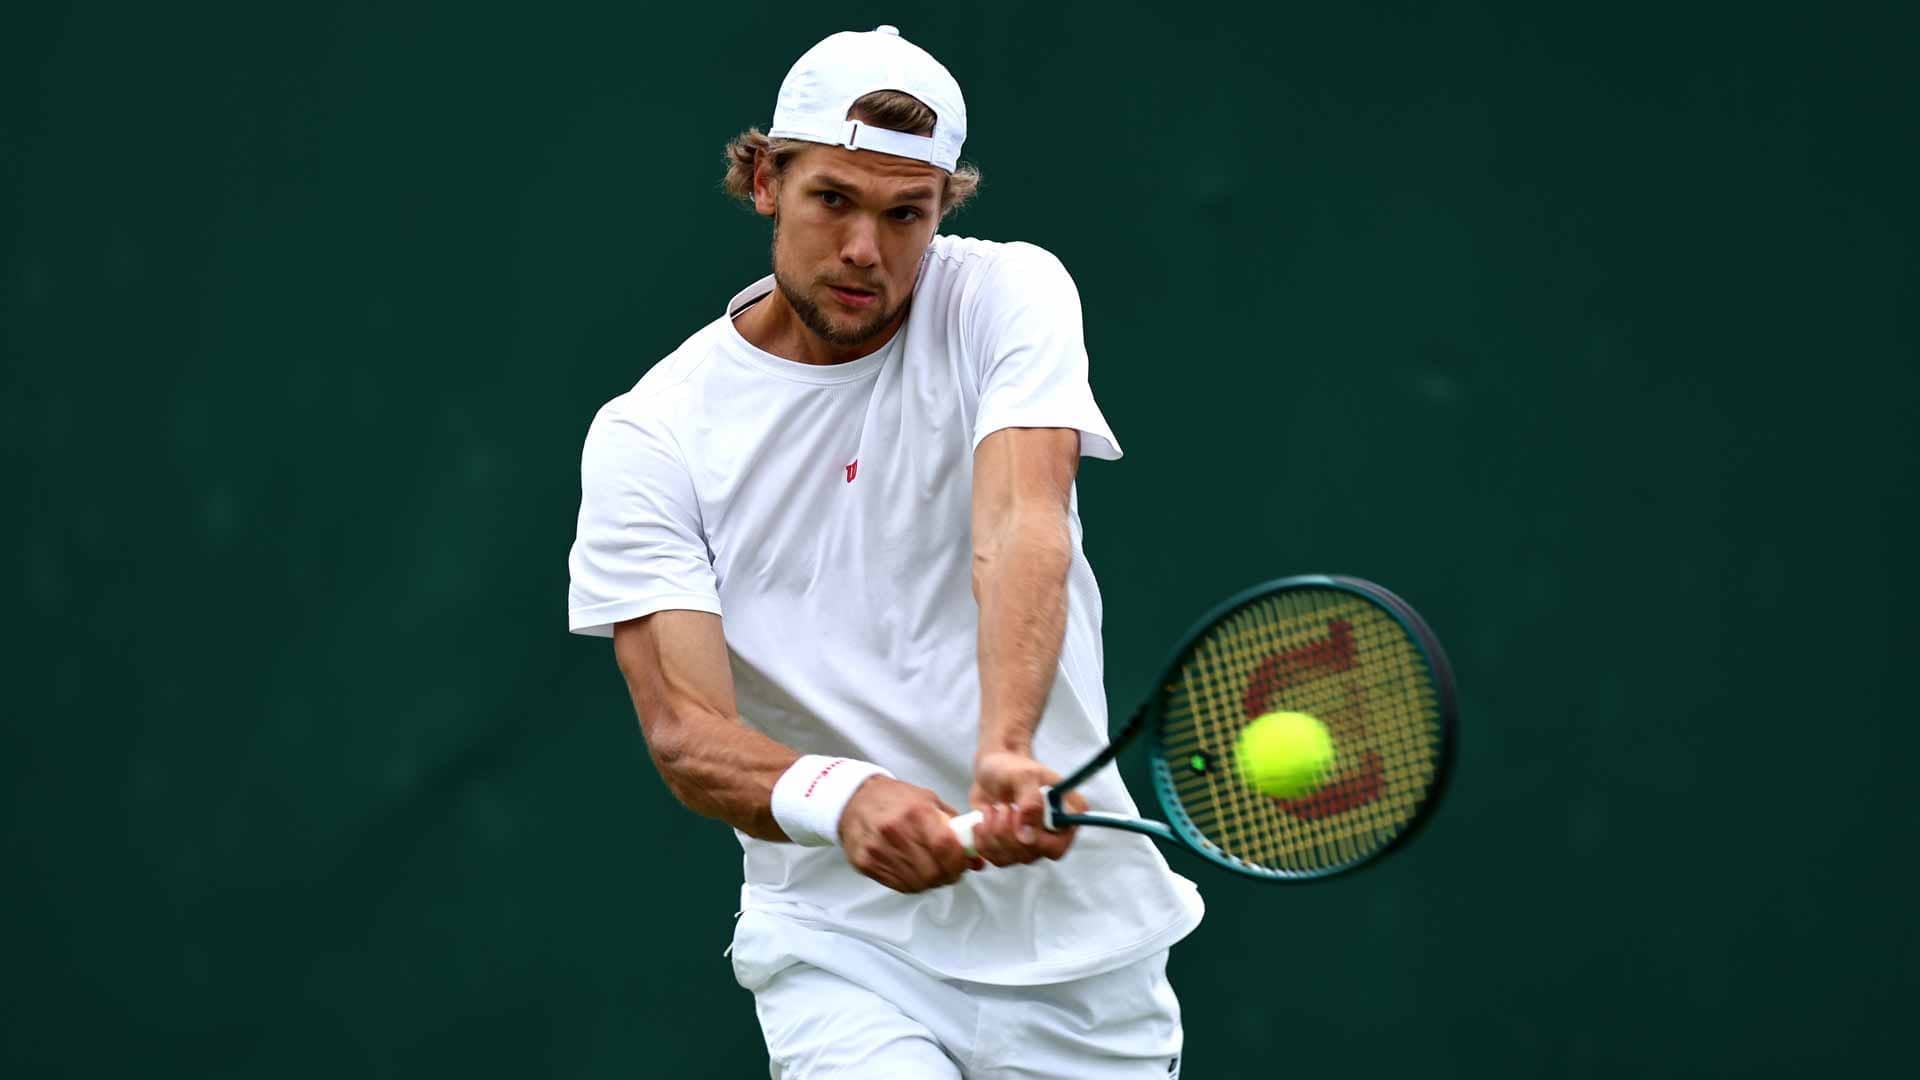 Family First: Why Otto raced back to Finland after qualifying at Wimbledon